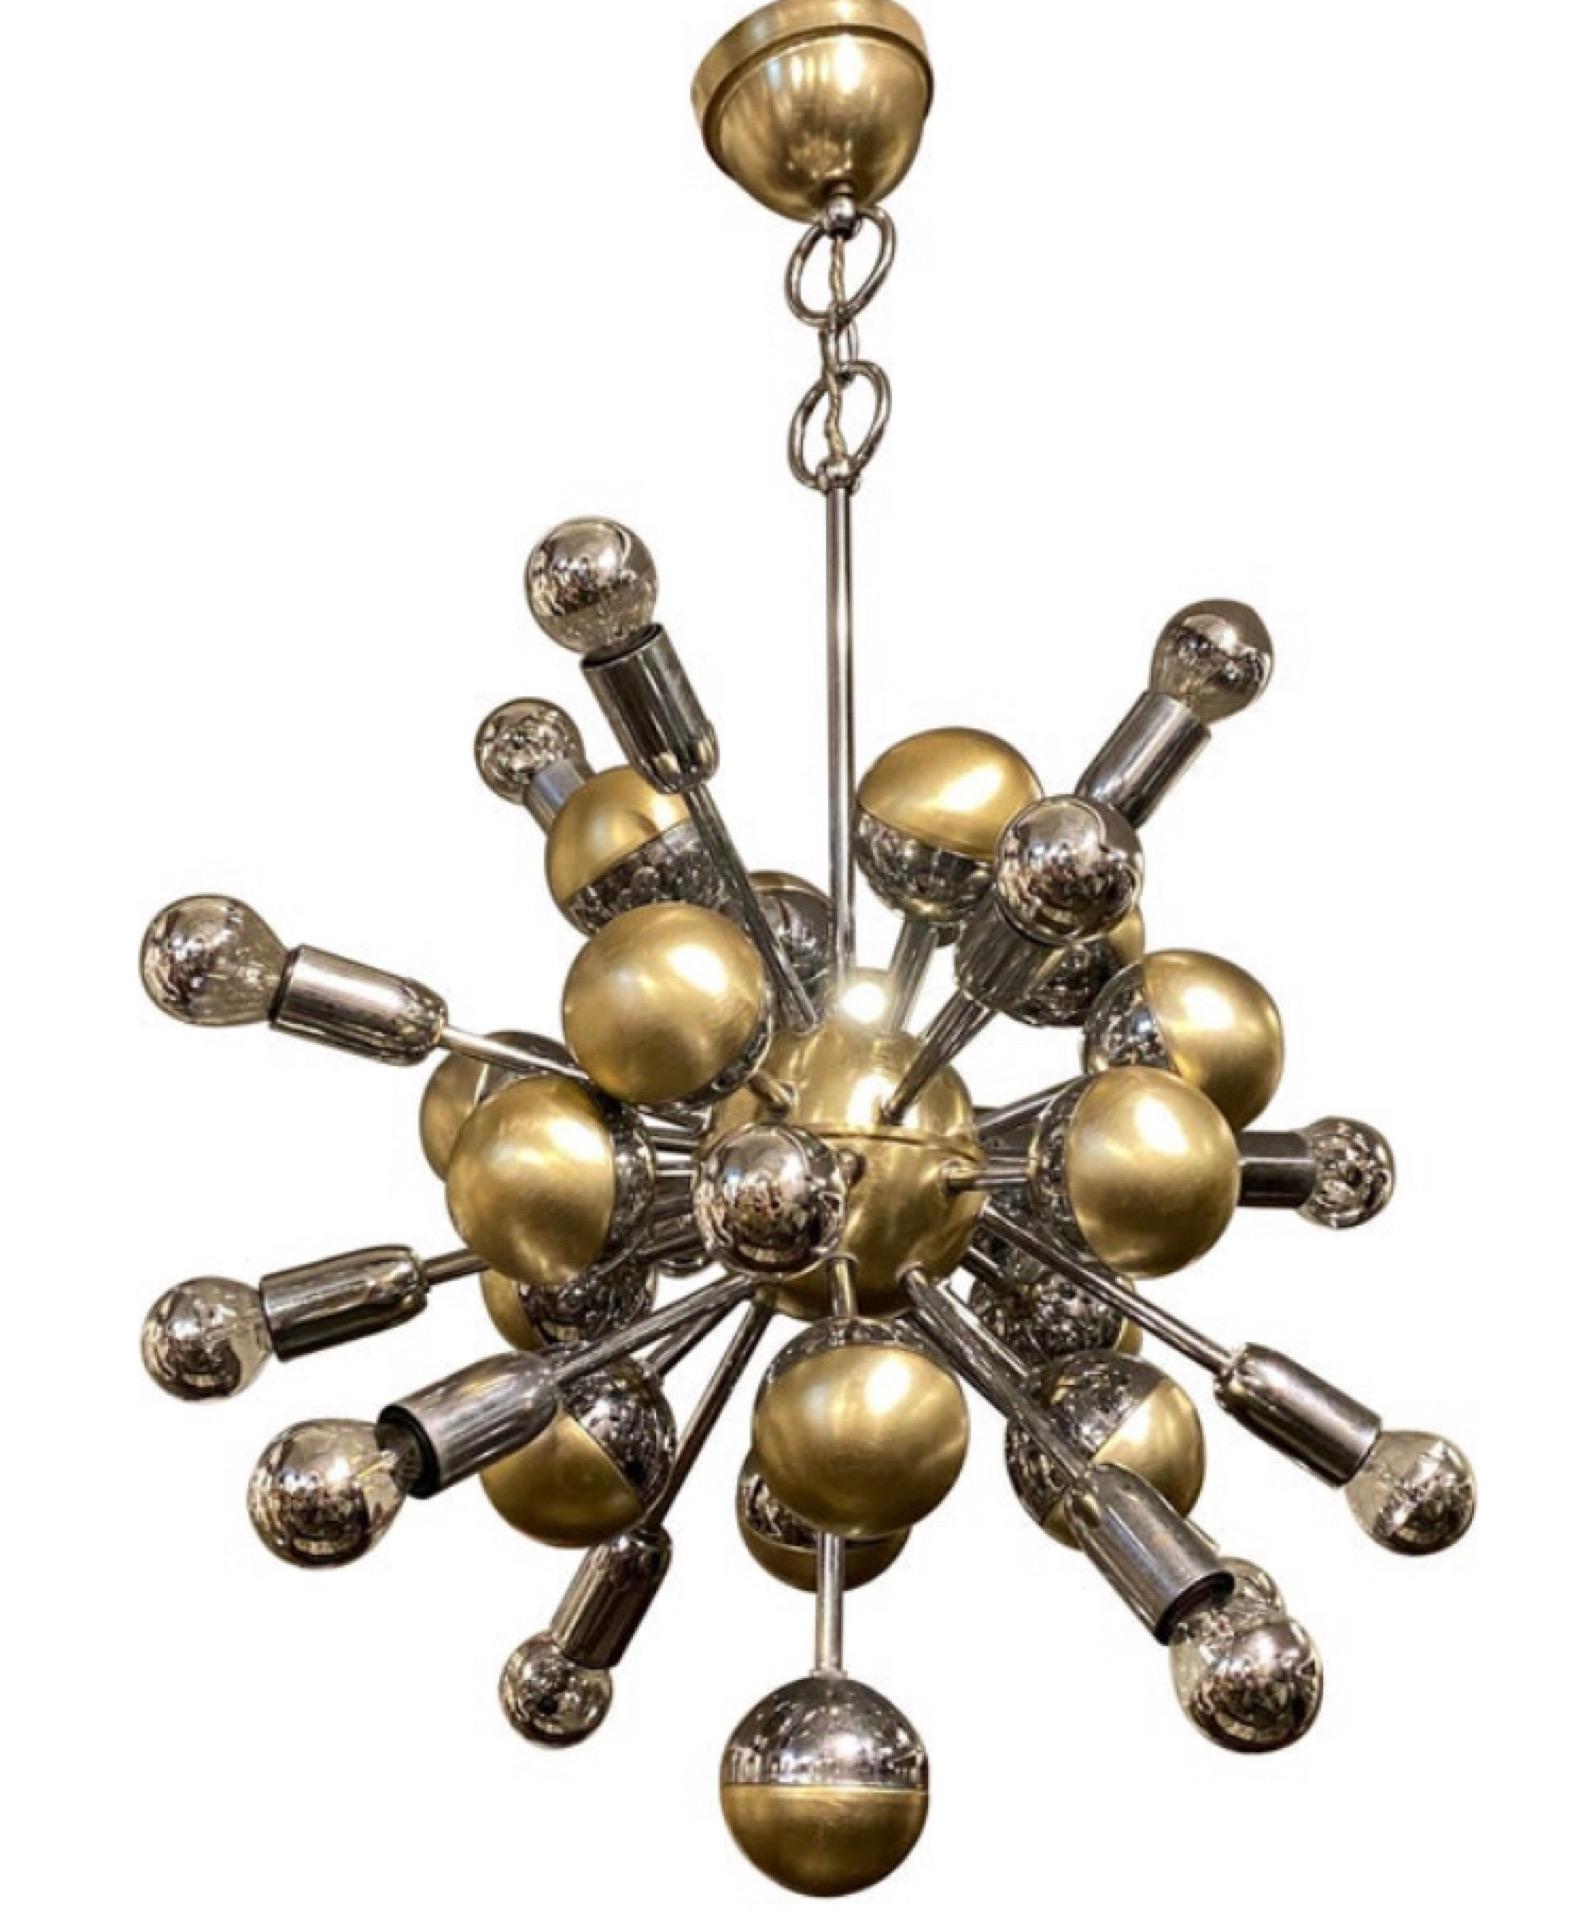 An amazing chromed metal and gilded aluminium sixteen lights sputnik chandelier. It's in good conditions, it works 110-240 volts and needs 16 regular e14 bulbs. It has been designed and manufactured in Italy by Reggiani.